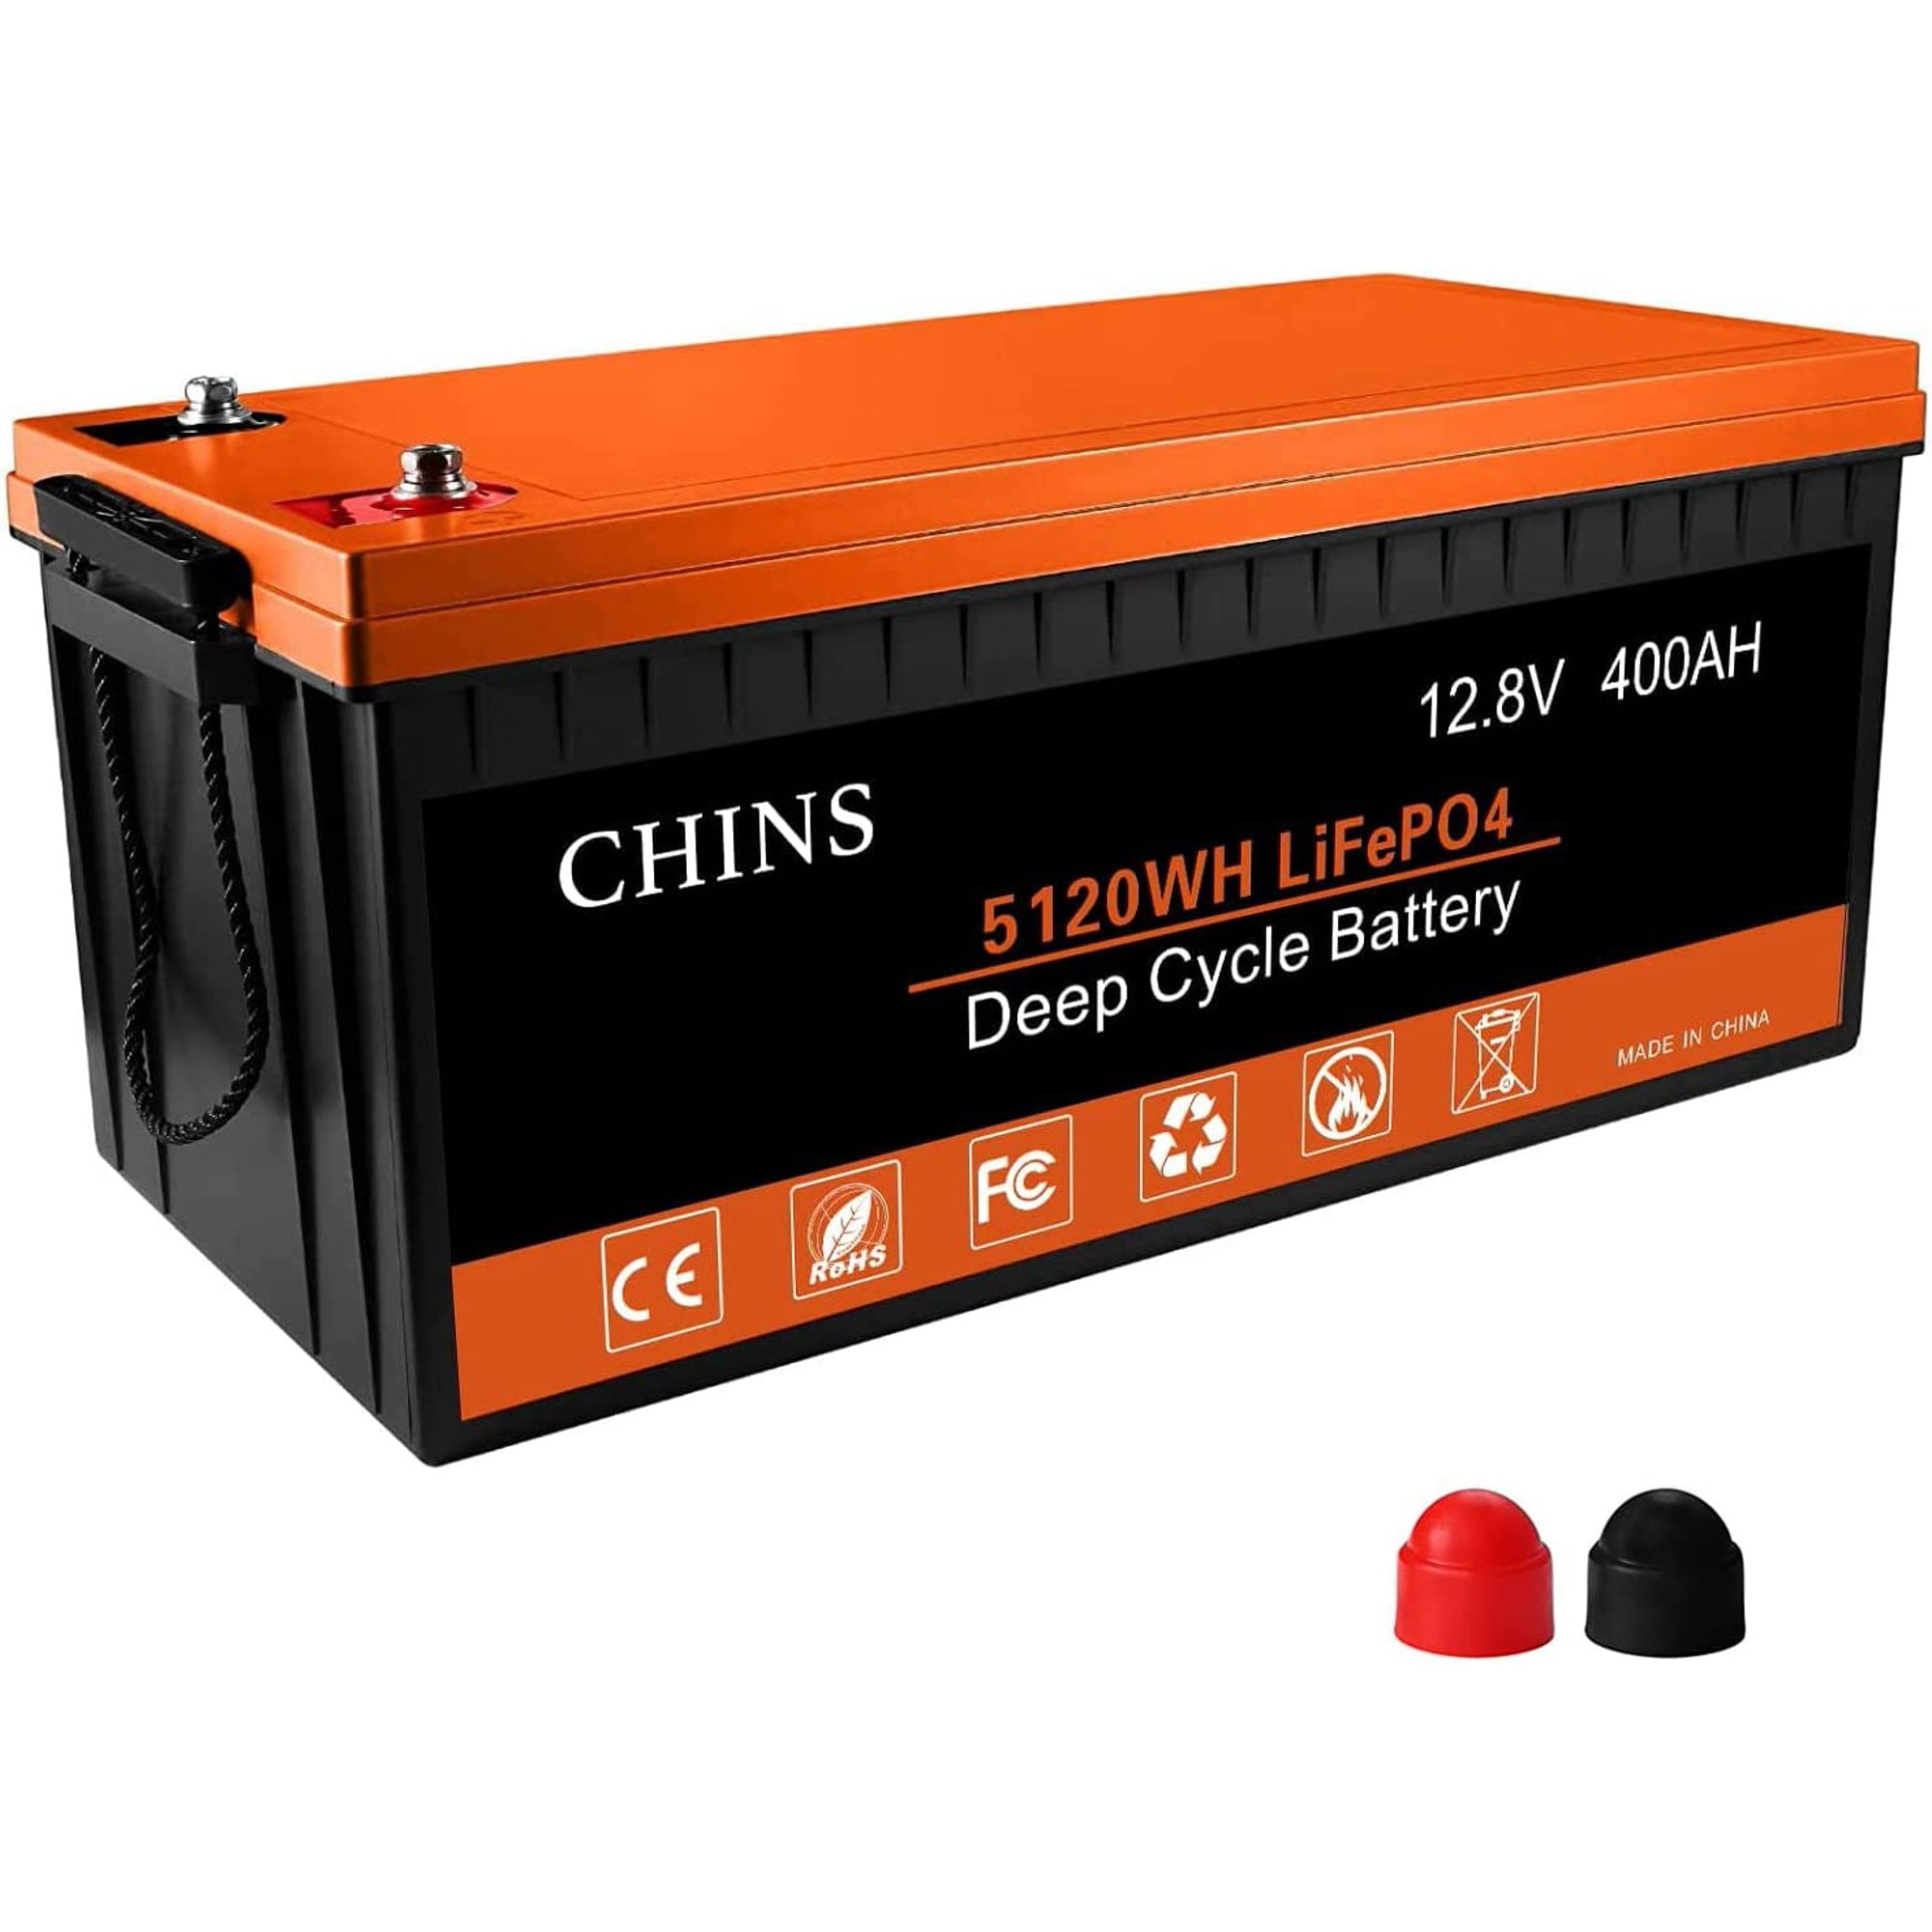  24v 100Ah LiFePO4 Battery Deep Cycle Lithium iron phosphate  Rechargeable Battery Built-in BMS Protect Charging and Discharging High  Performance for Golf Cart EV RV Solar Energy Storage Battery : Automotive